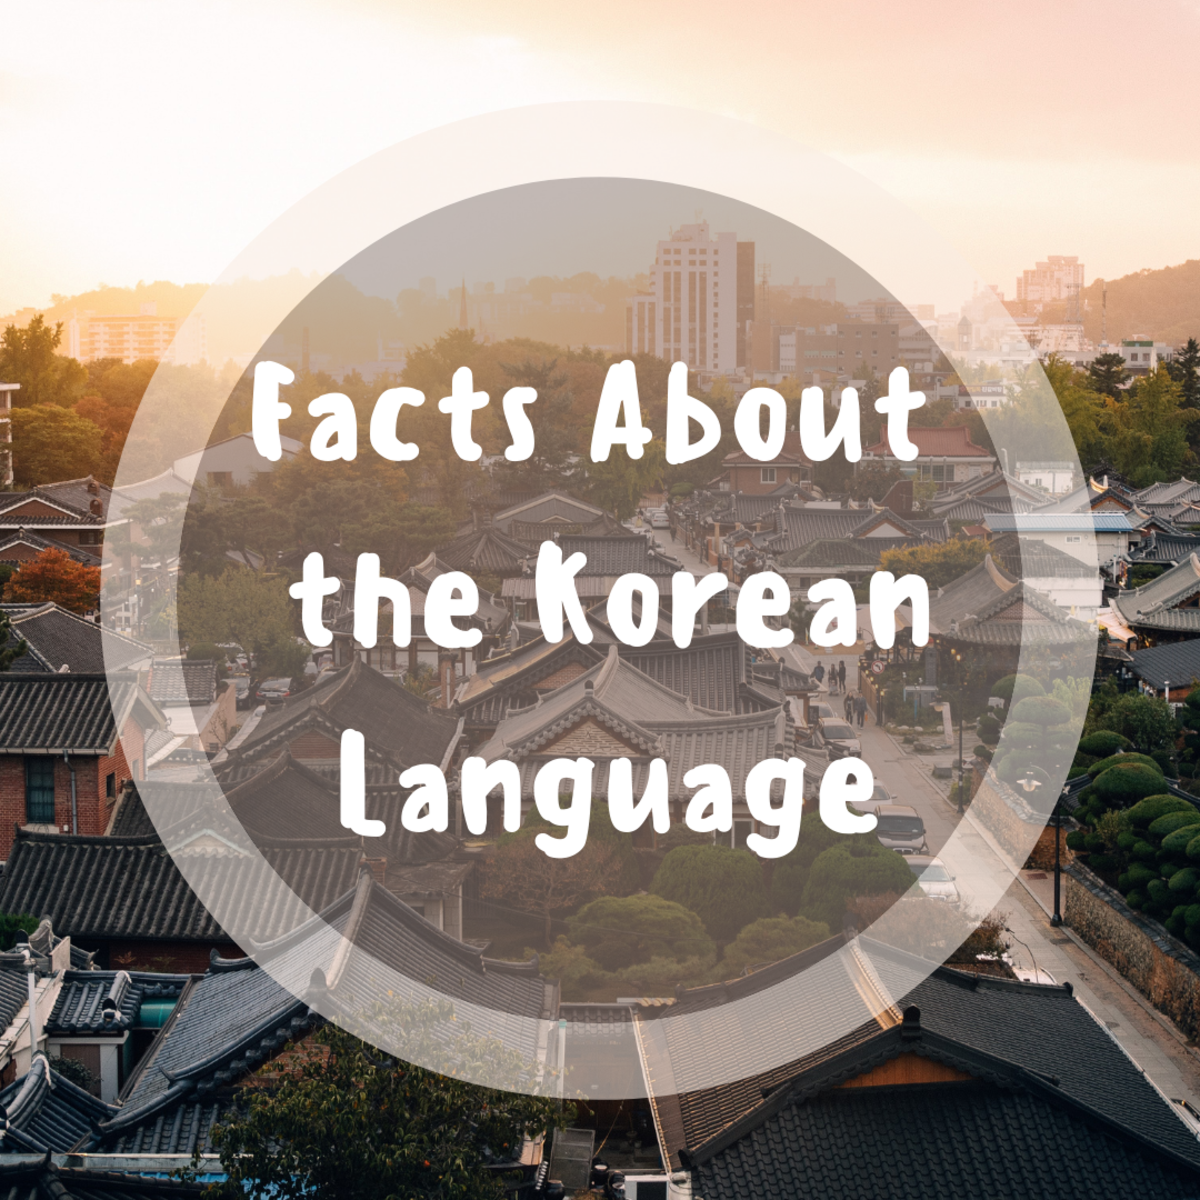 Learn facts about the Korean language